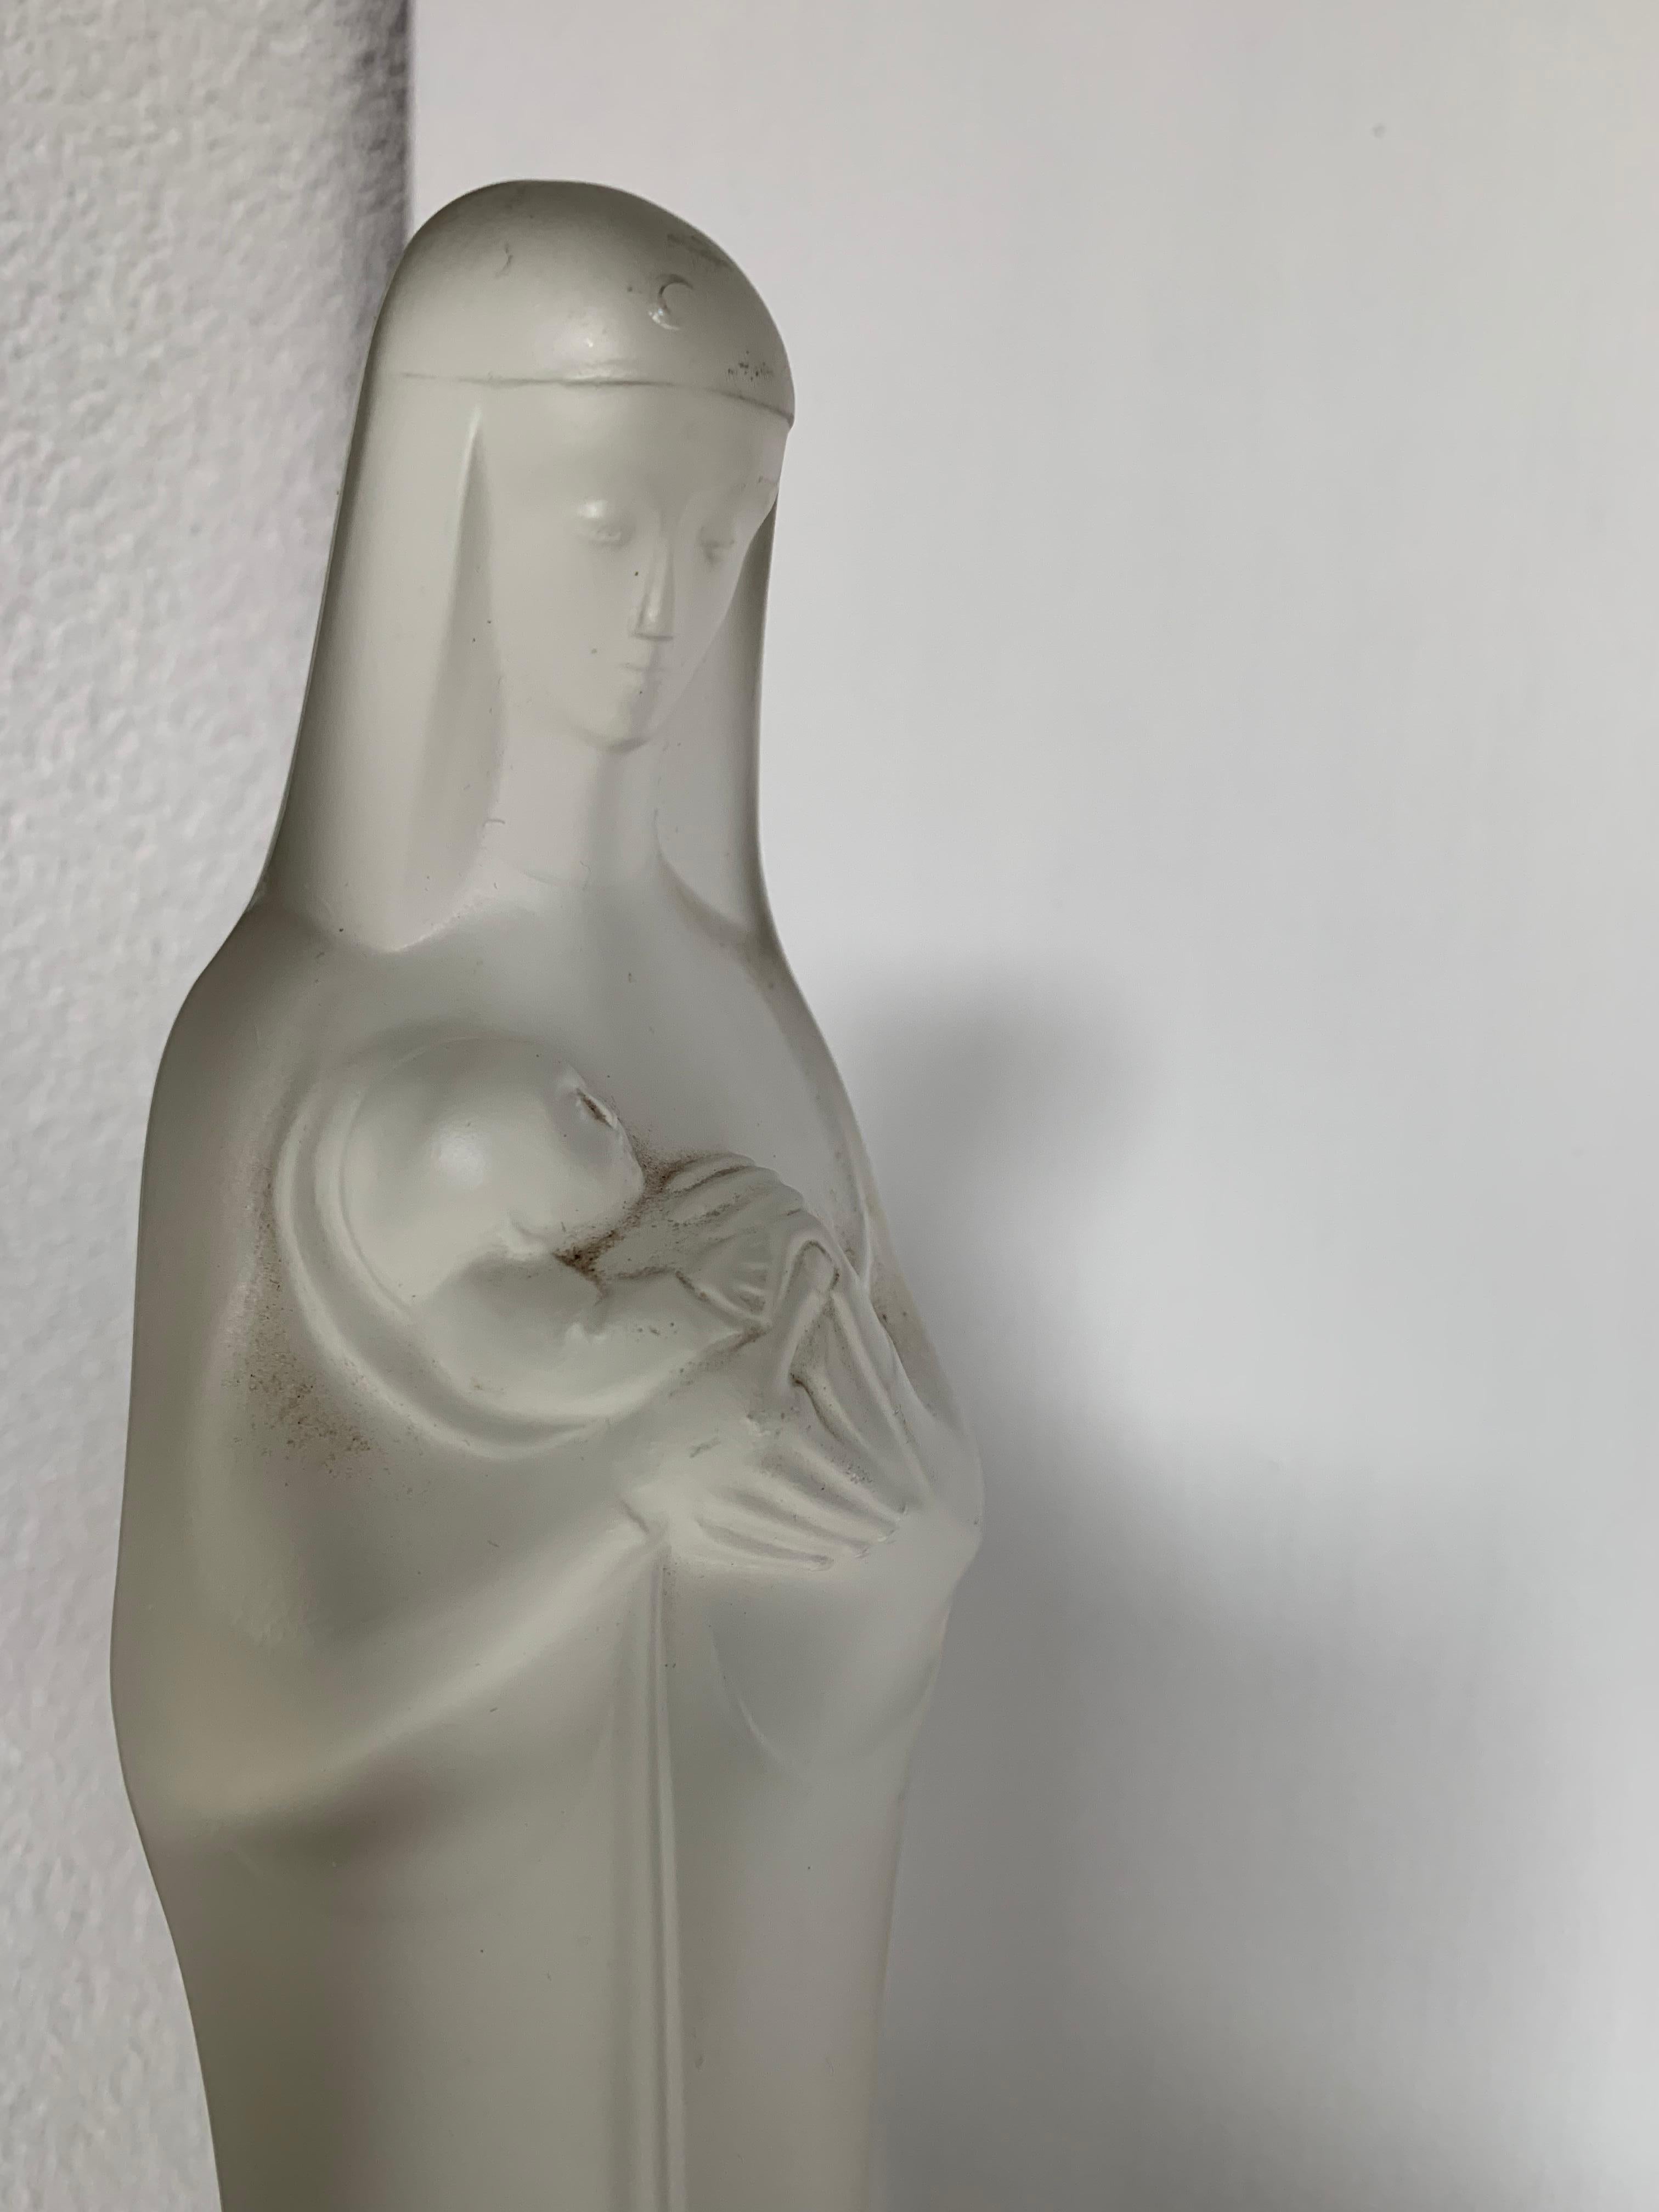 Stunning Design Glass Art Madonna and Child Jesus Sculpture w. Stand and Light For Sale 7